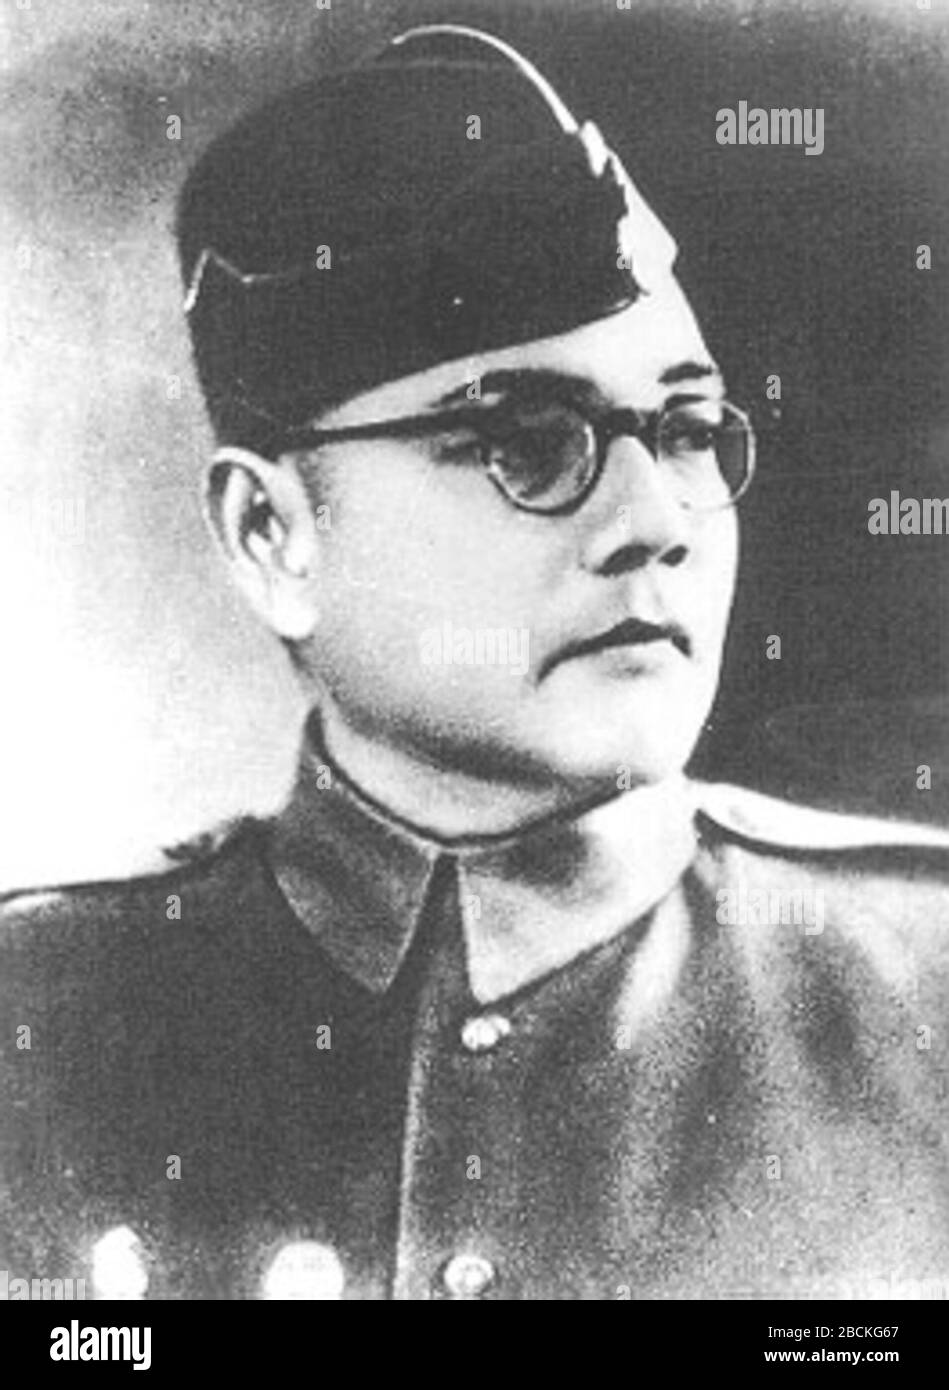 English: Subhas Chandra Bose, Indian nationalist and prominent ...